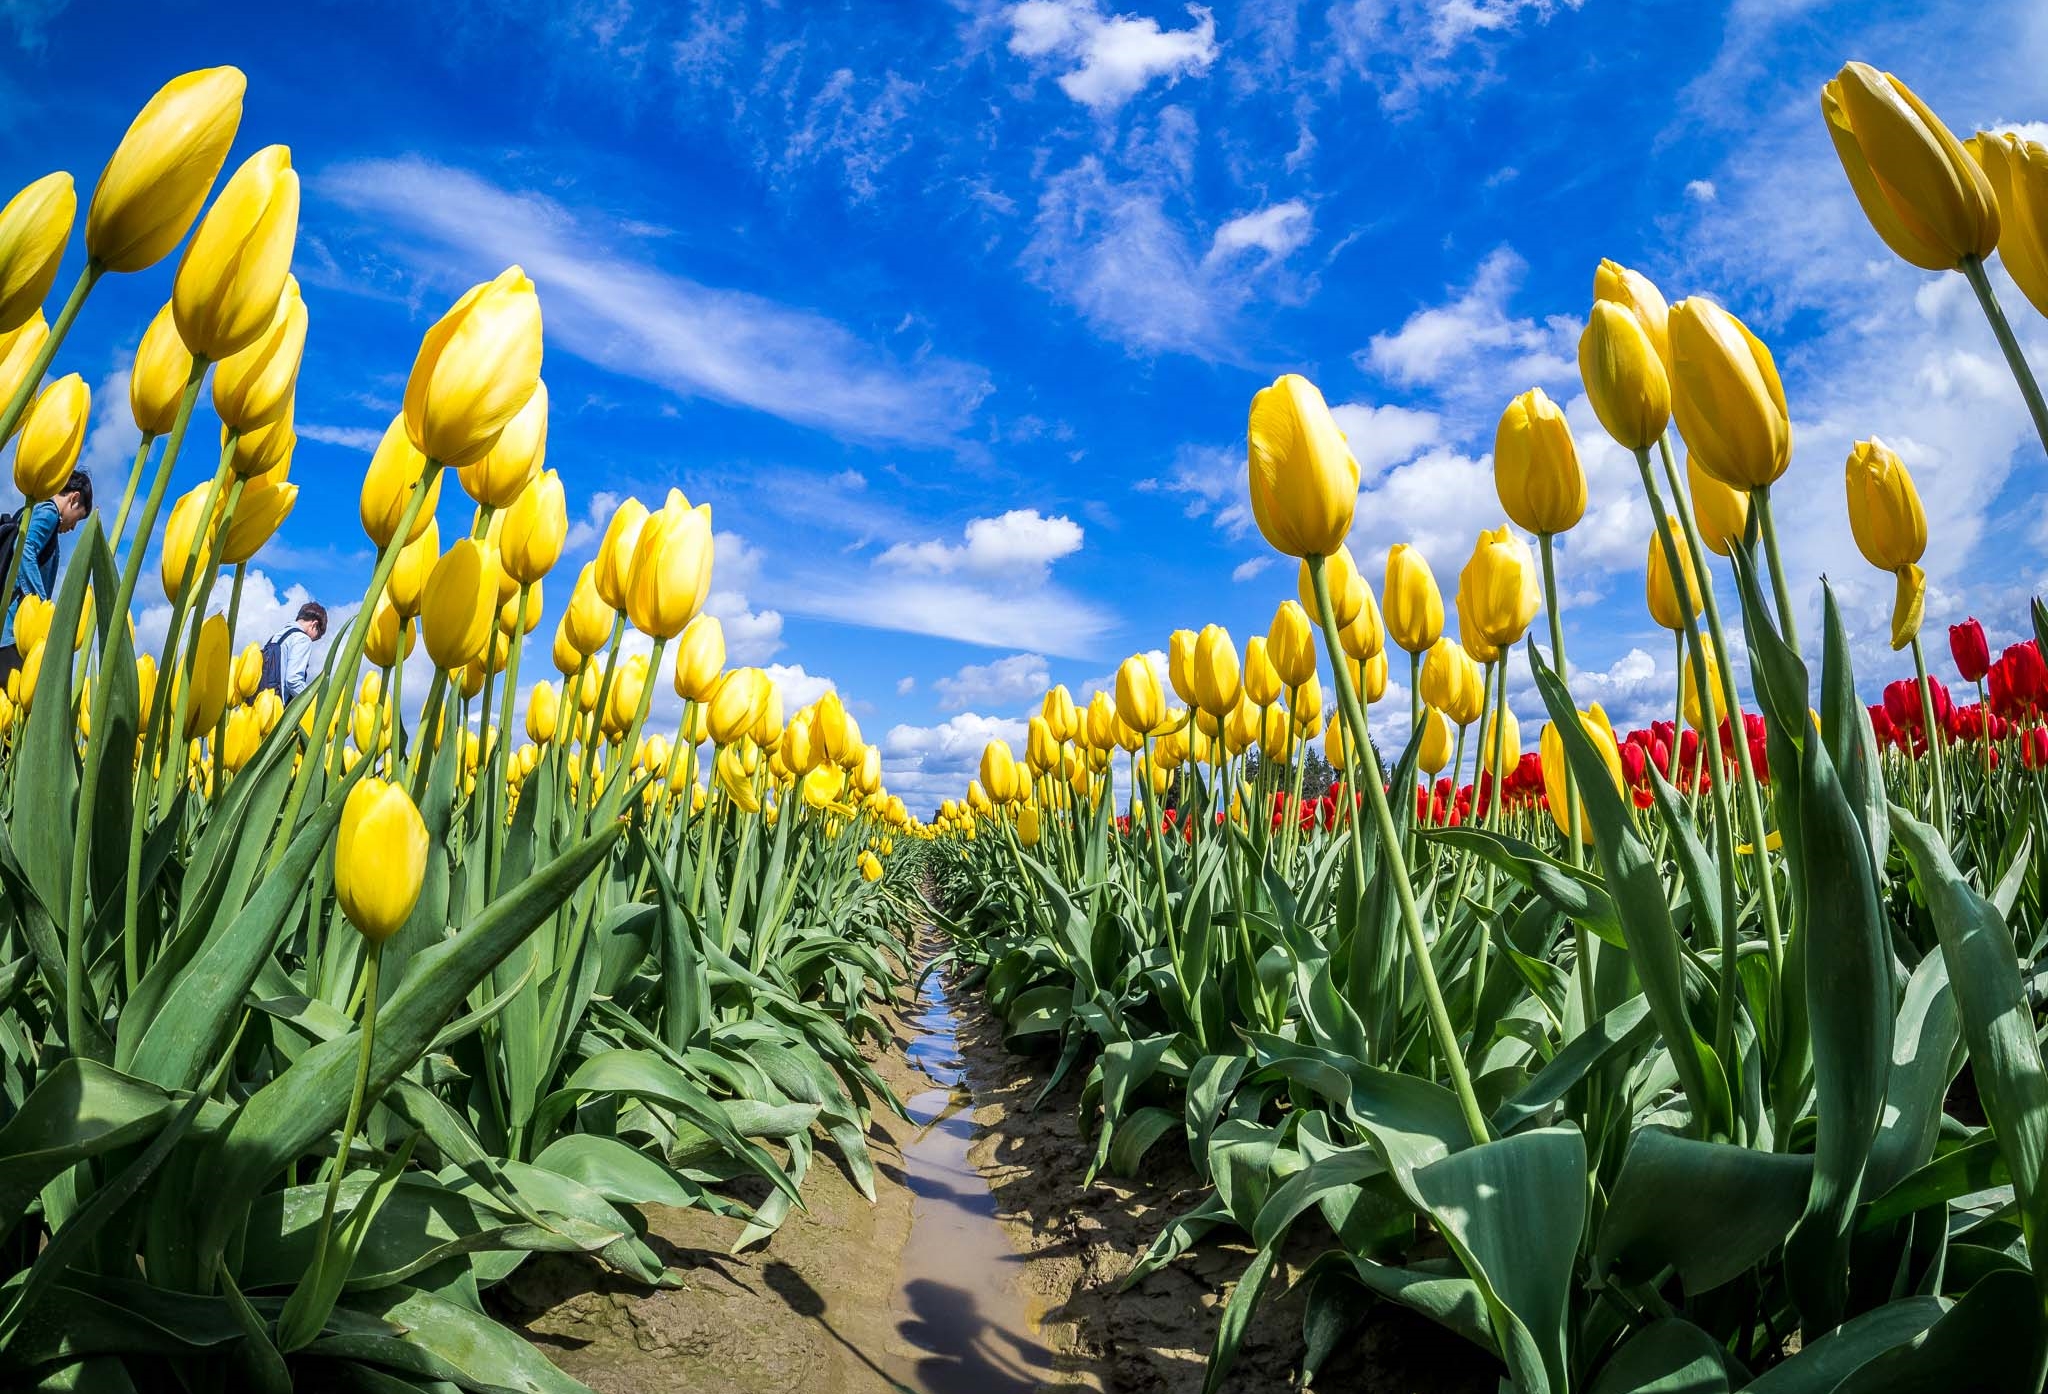 blue, field, spring, yellow, red, flowers, Washington, tulips, green ...